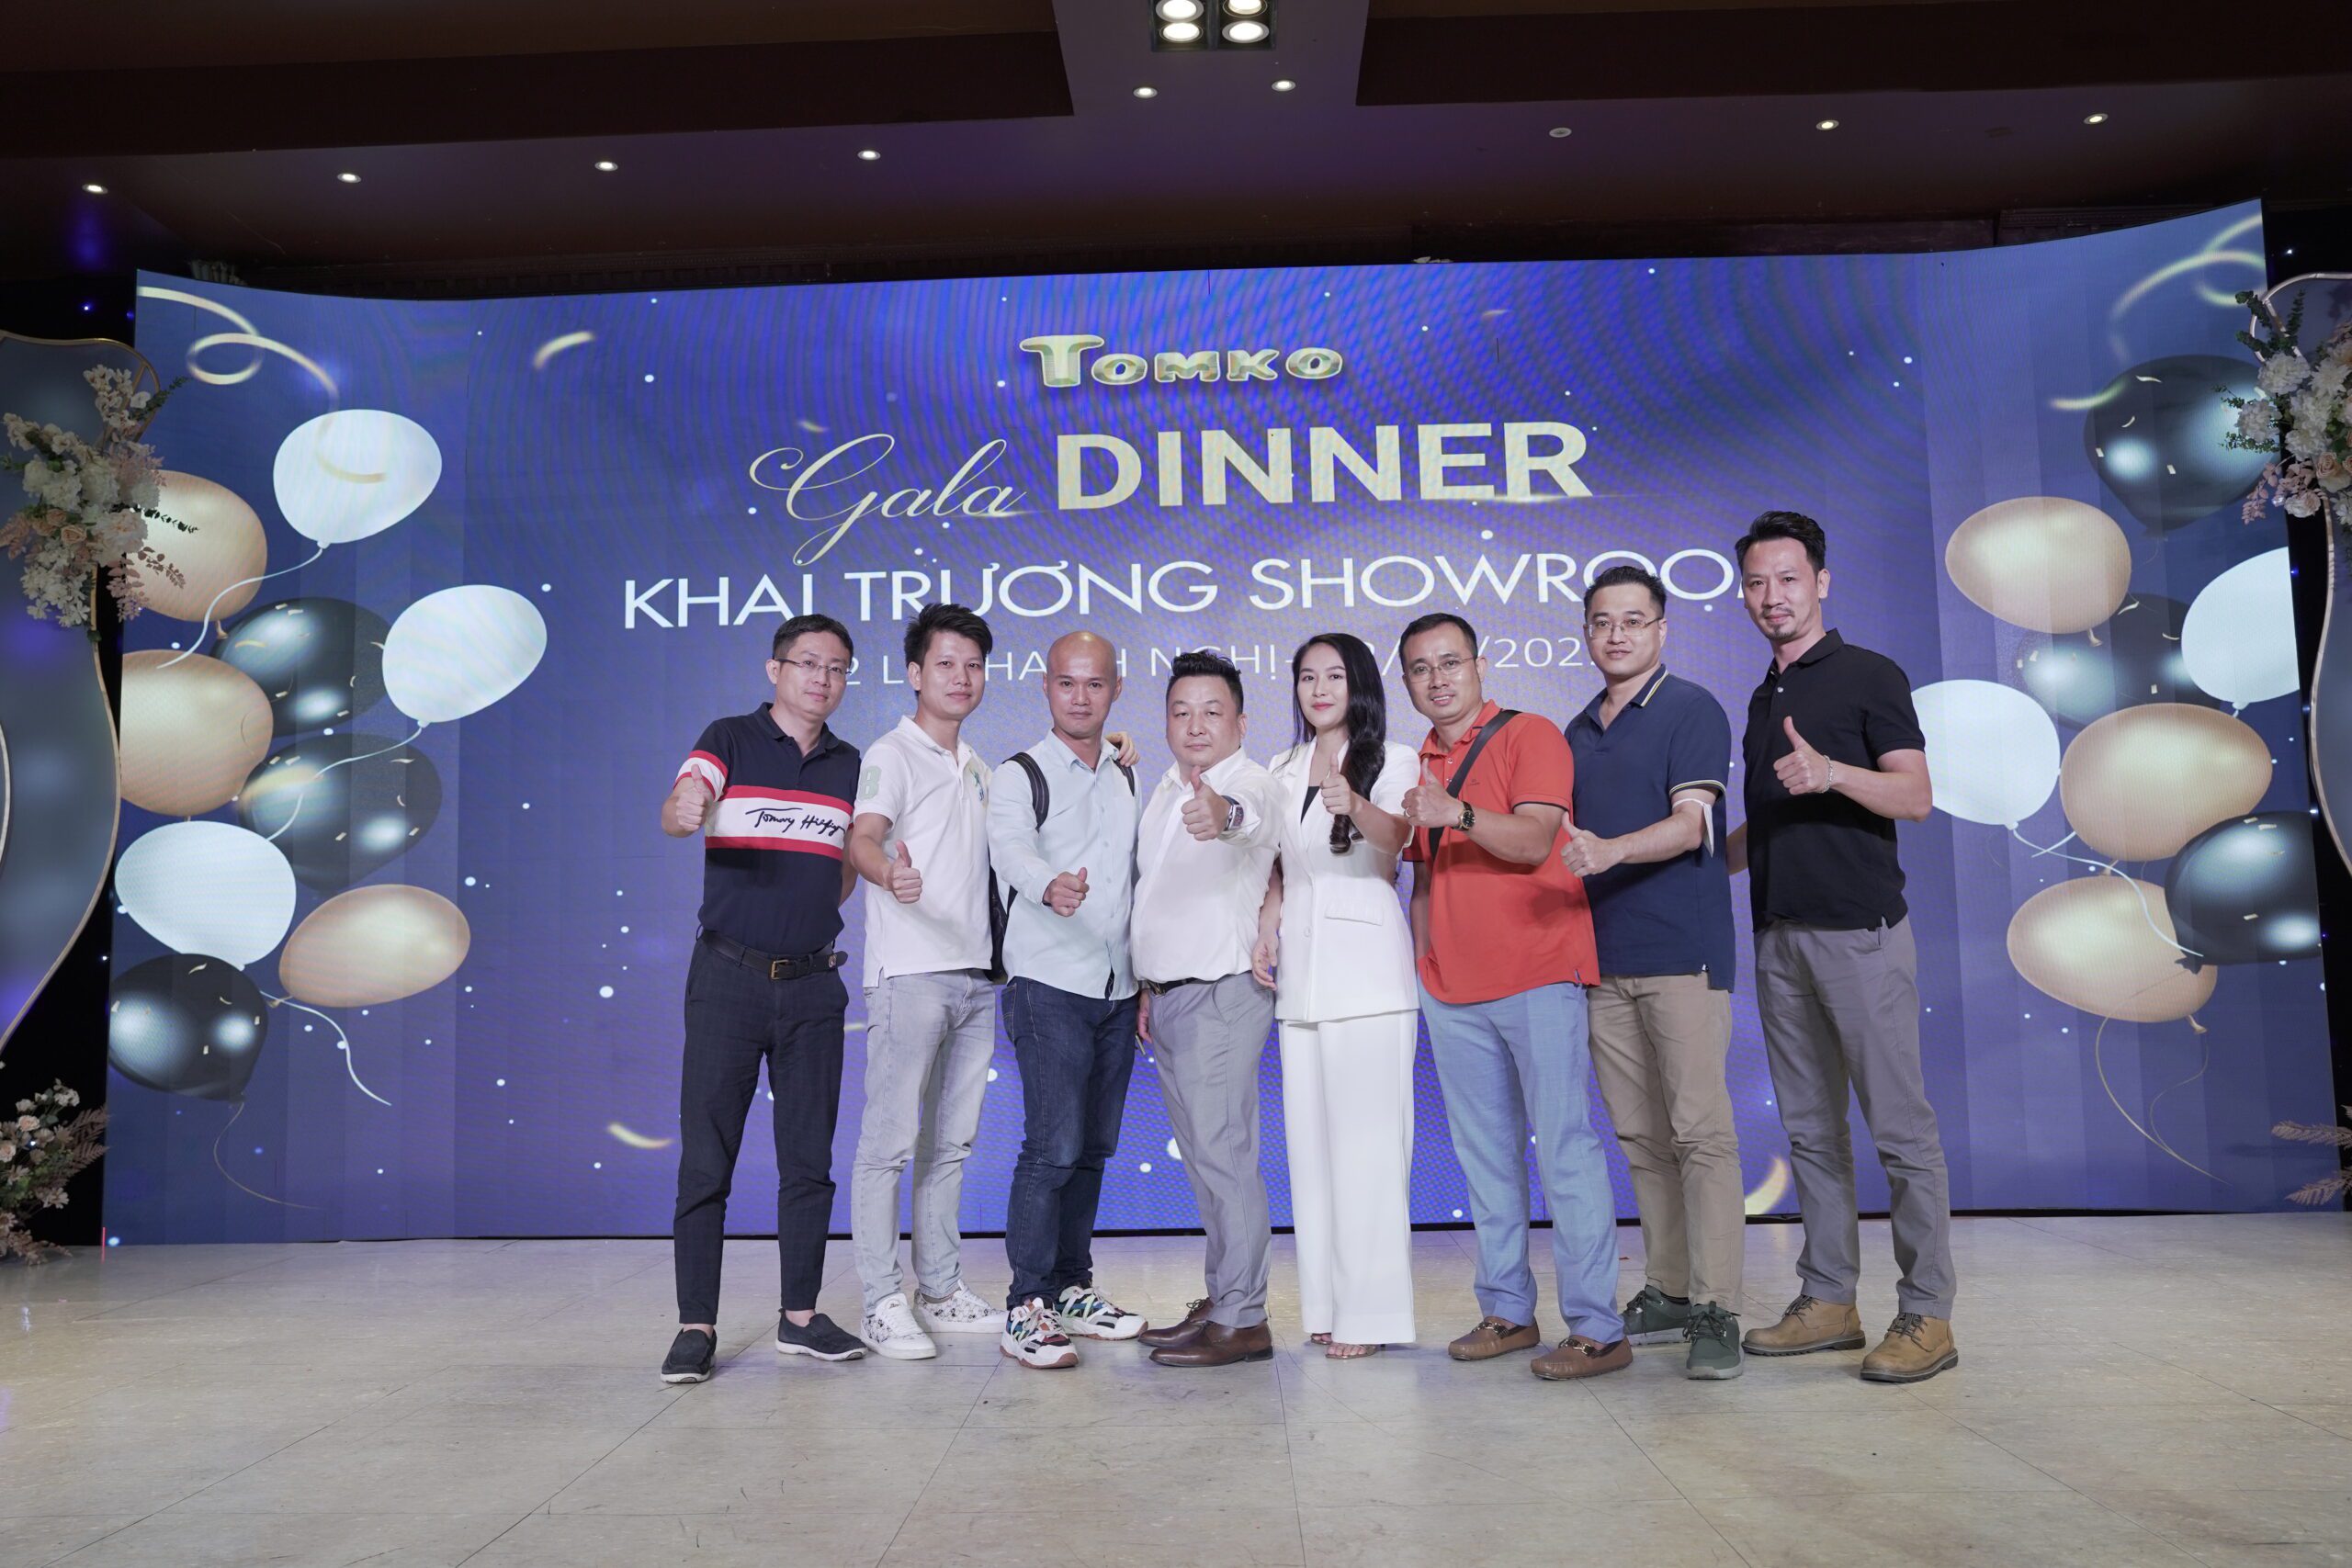 anh gala dinner khai truong showroom tomko 192 le thanh nghi 4